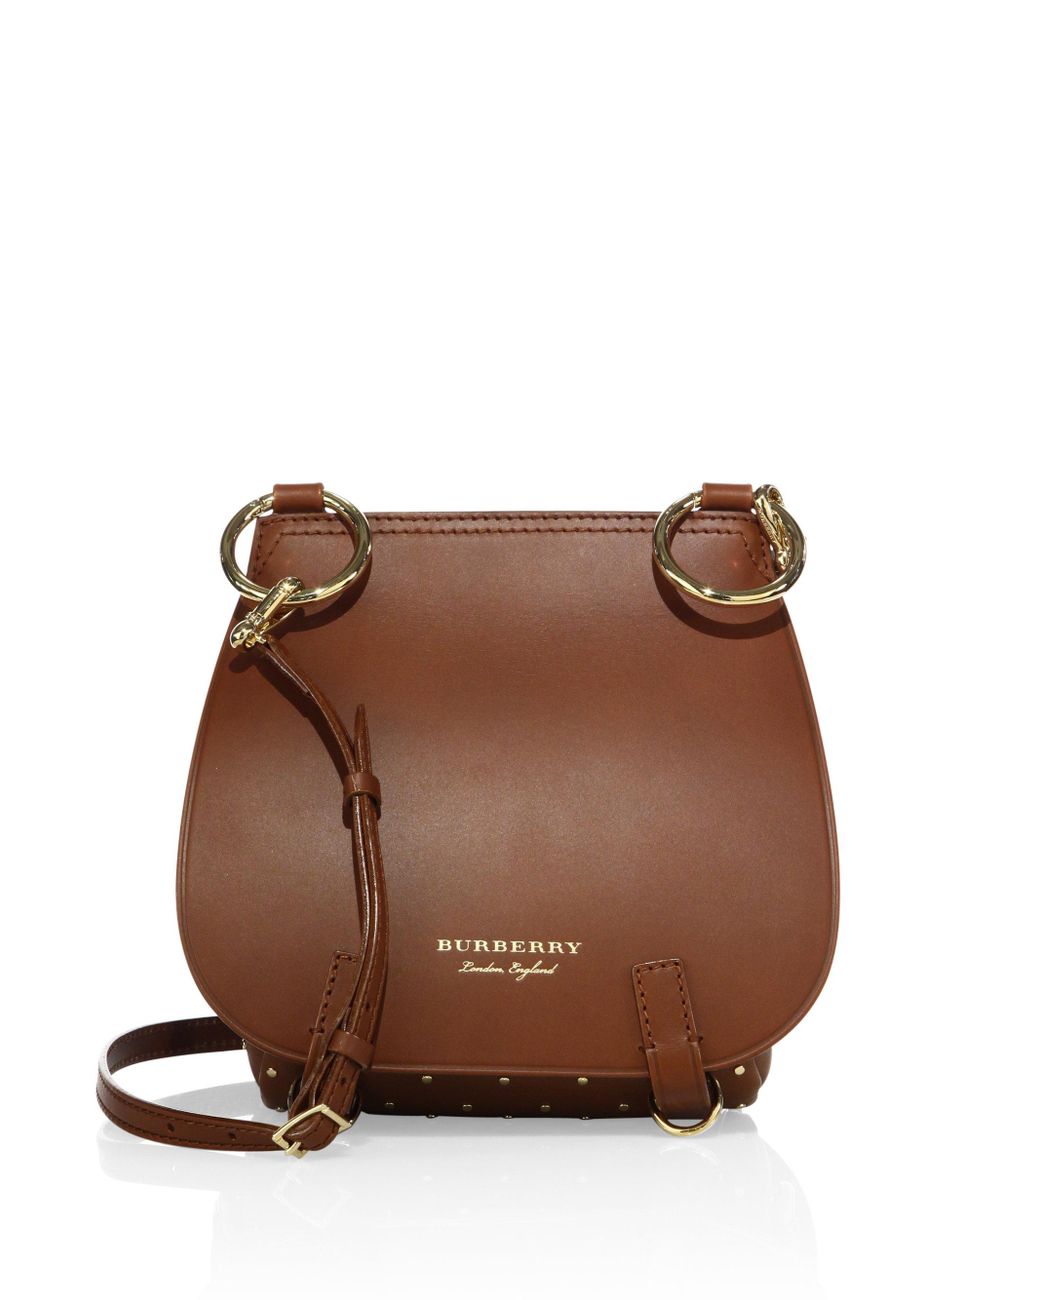 Burberry Bridle Saddle Bag Leather Small - ShopStyle